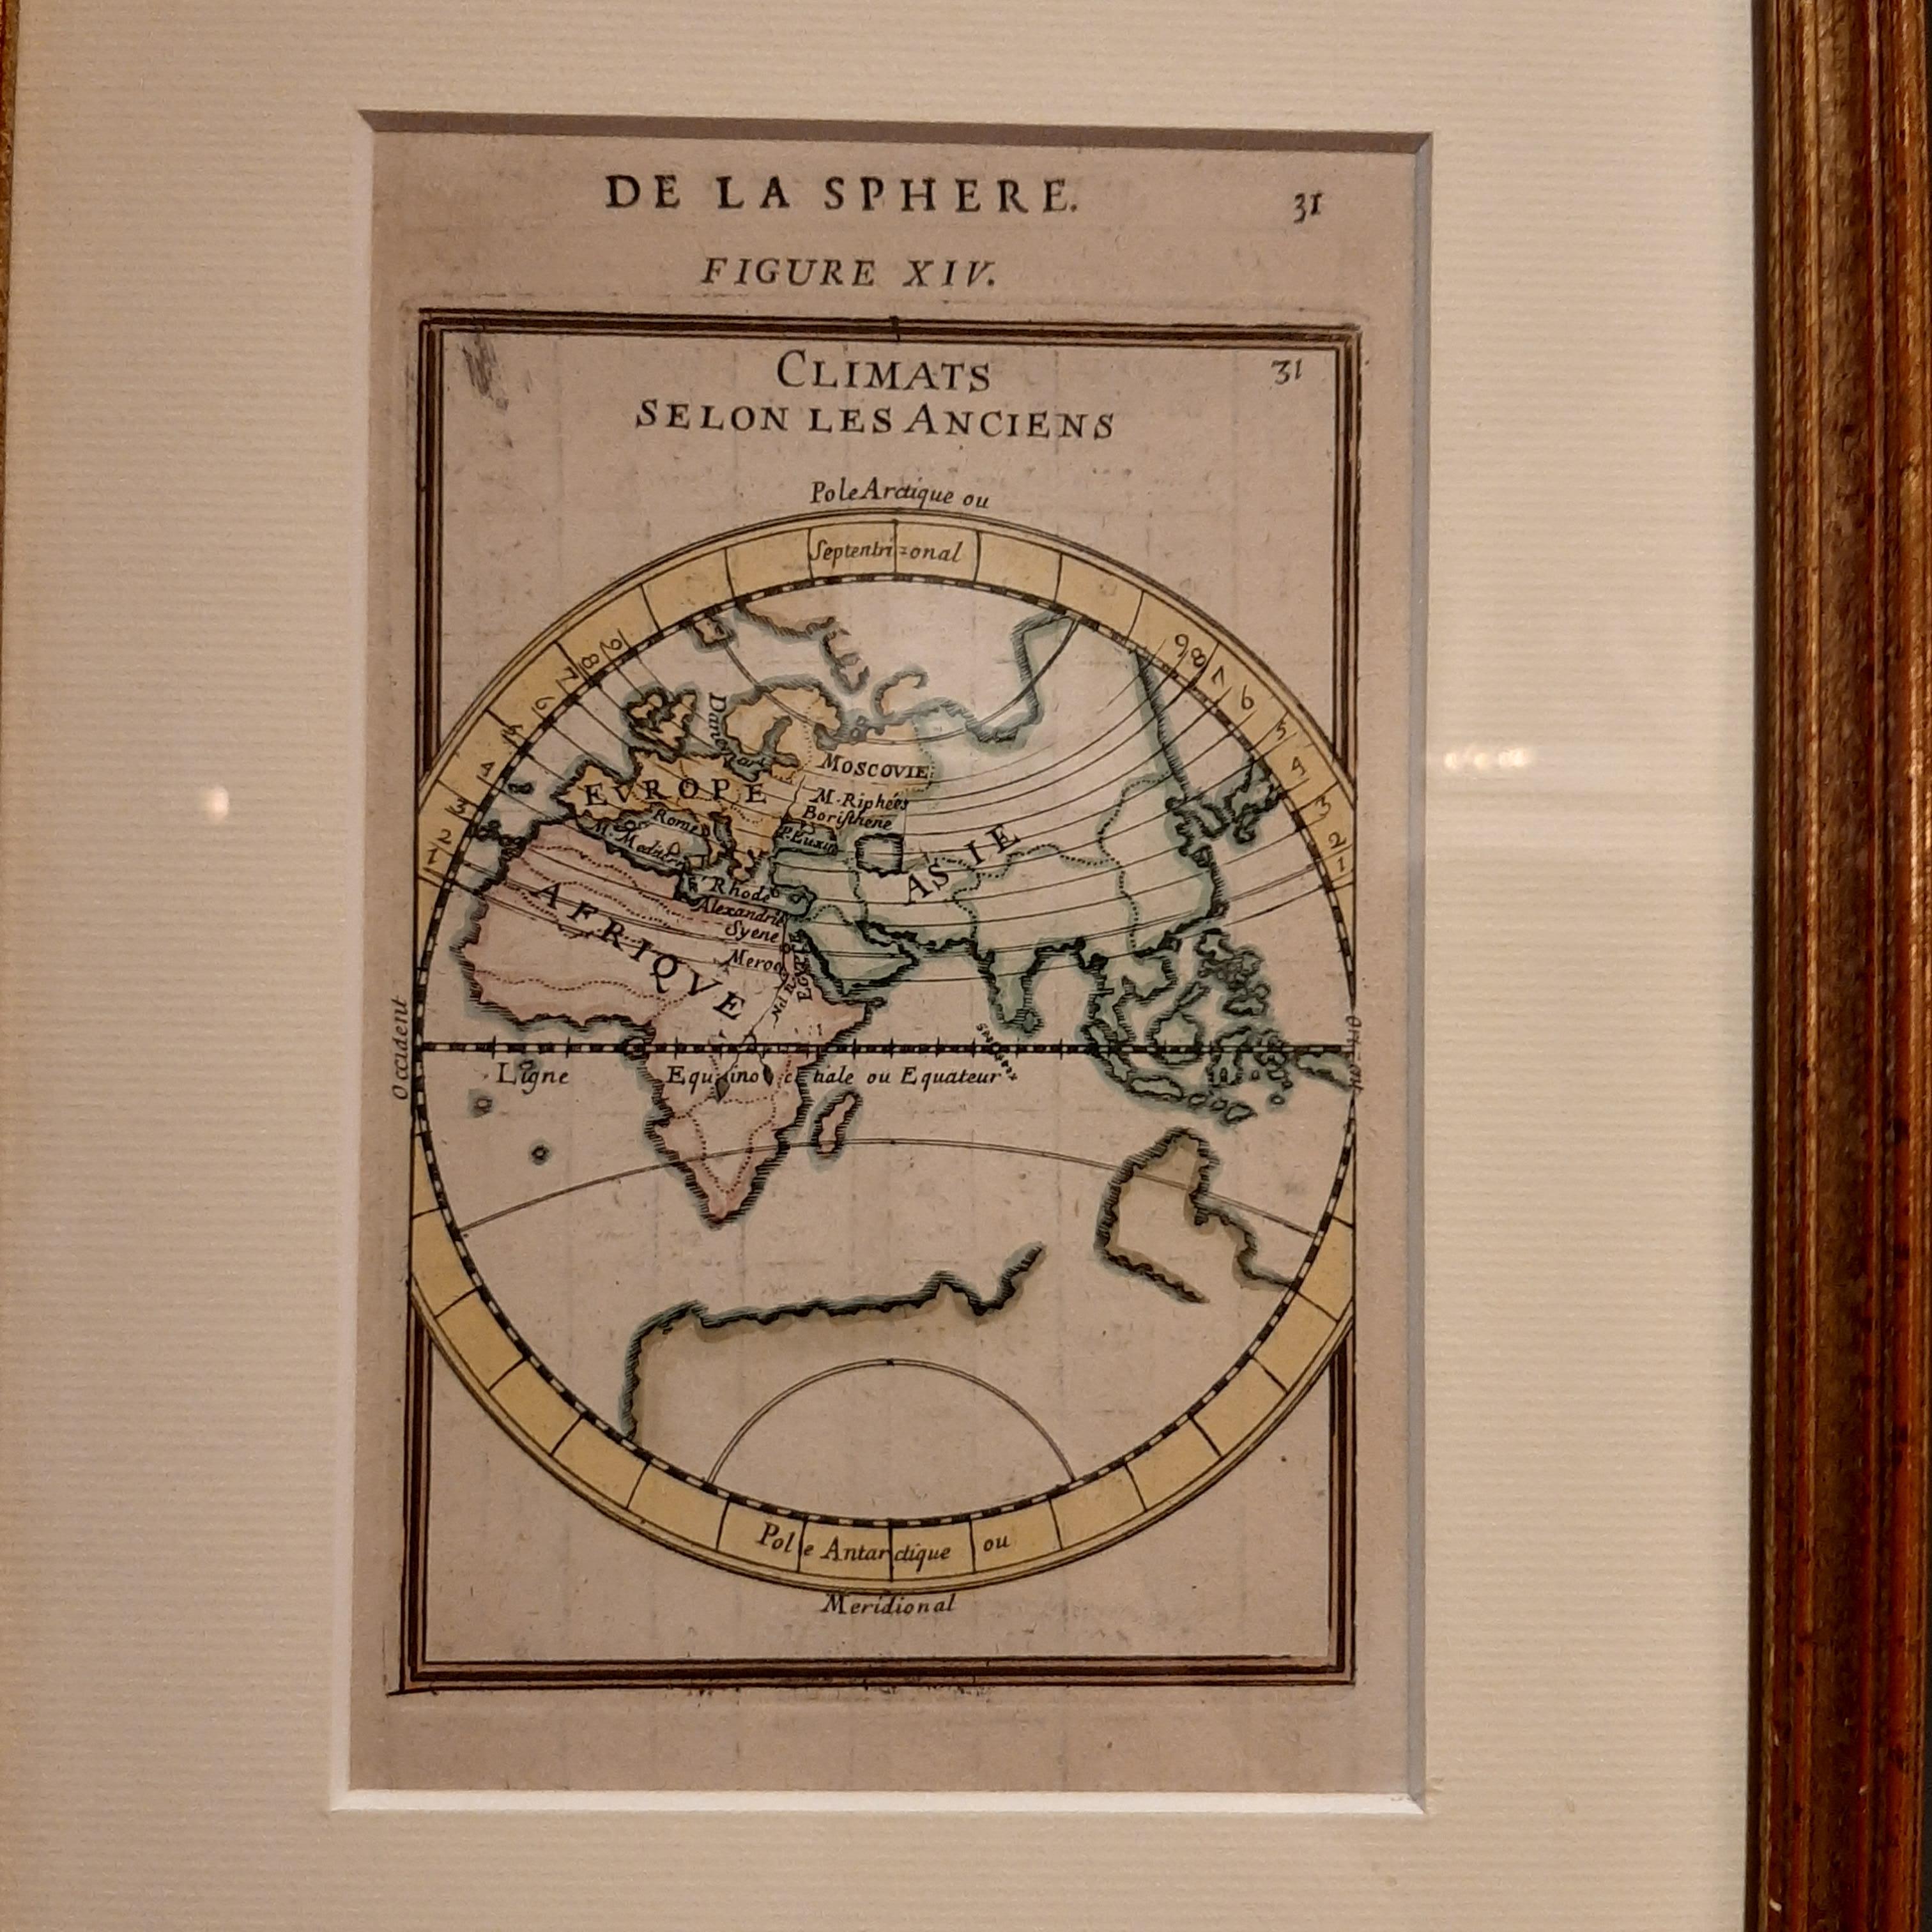 Antique map titled 'Climats selon les Anciens'. Miniature map of the Eastern Hemisphere showing the climatic regions. This map originates from 'Description de l'Univers' by A.M. Mallet. Published circa 1683. 

Frame included. We carefully pack our